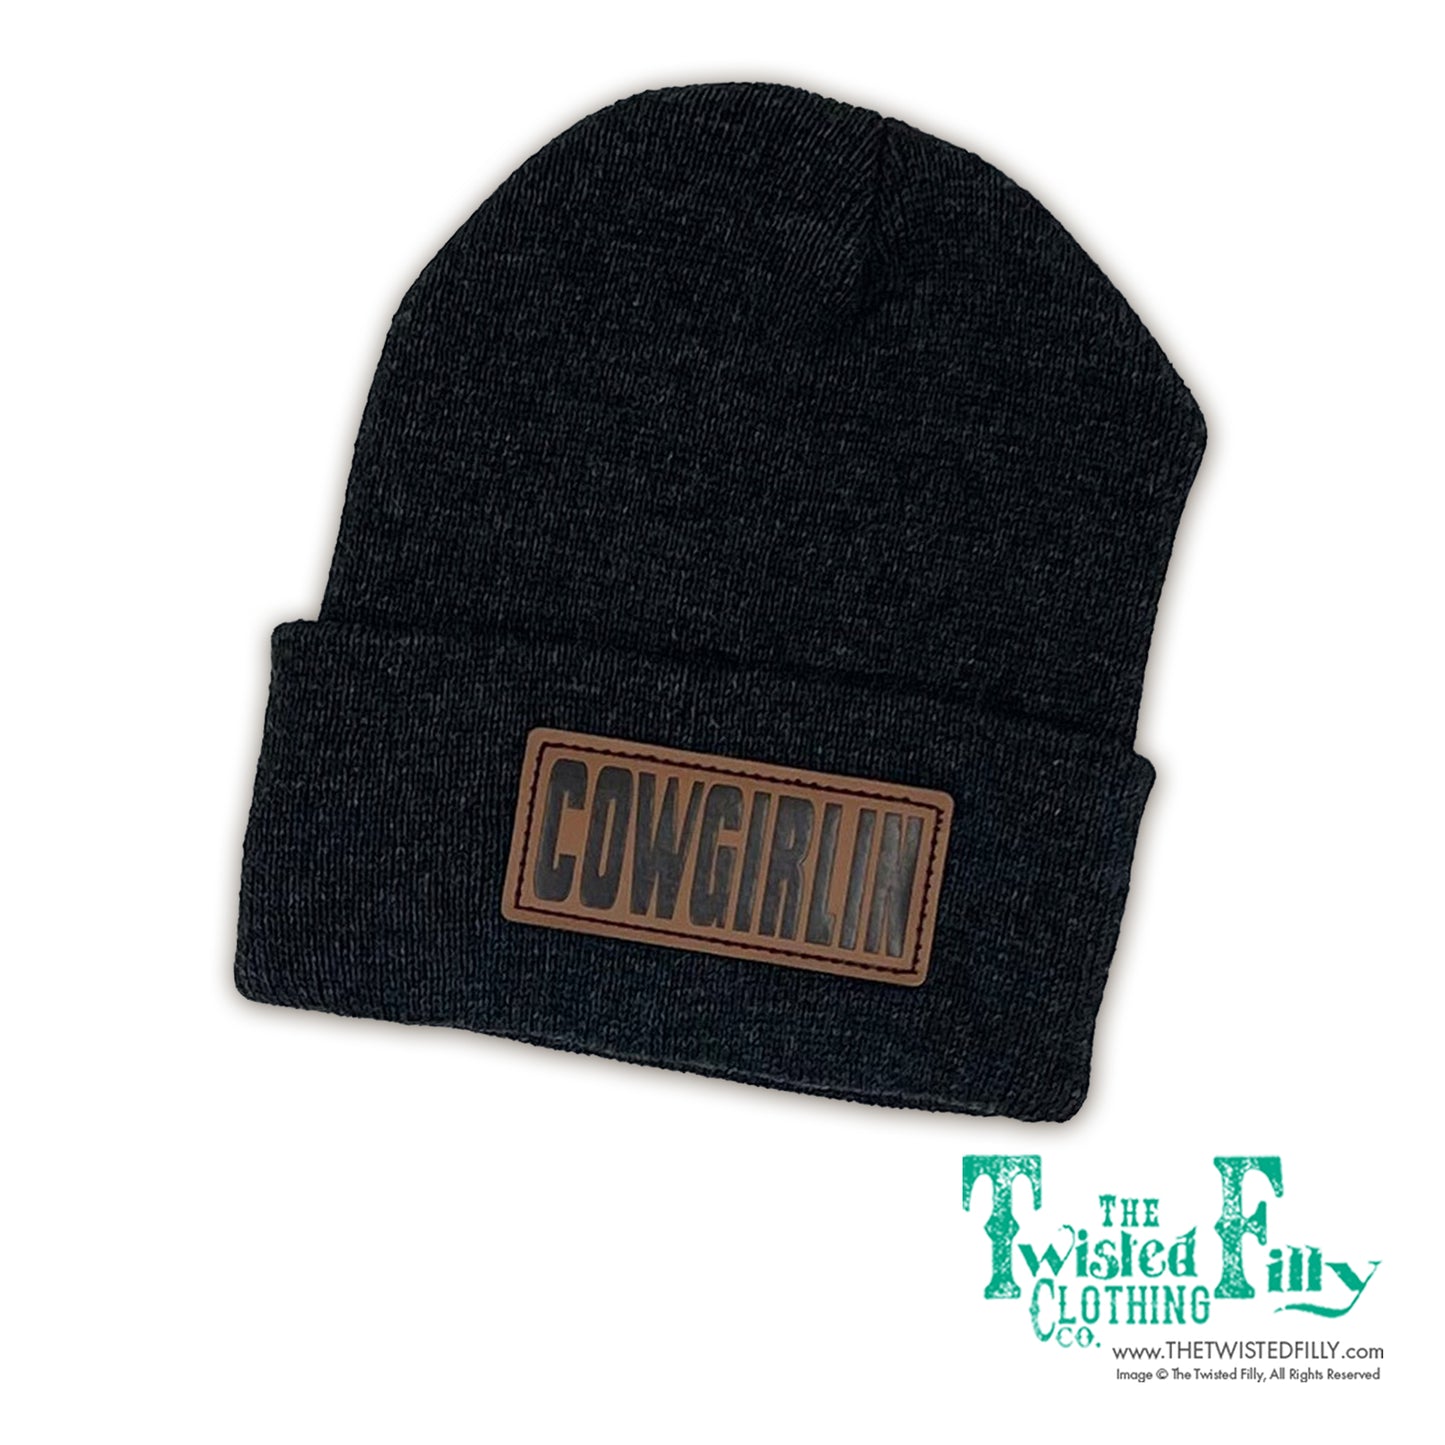 Cowgirlin' Leather Patch Beanie -  Charcoal